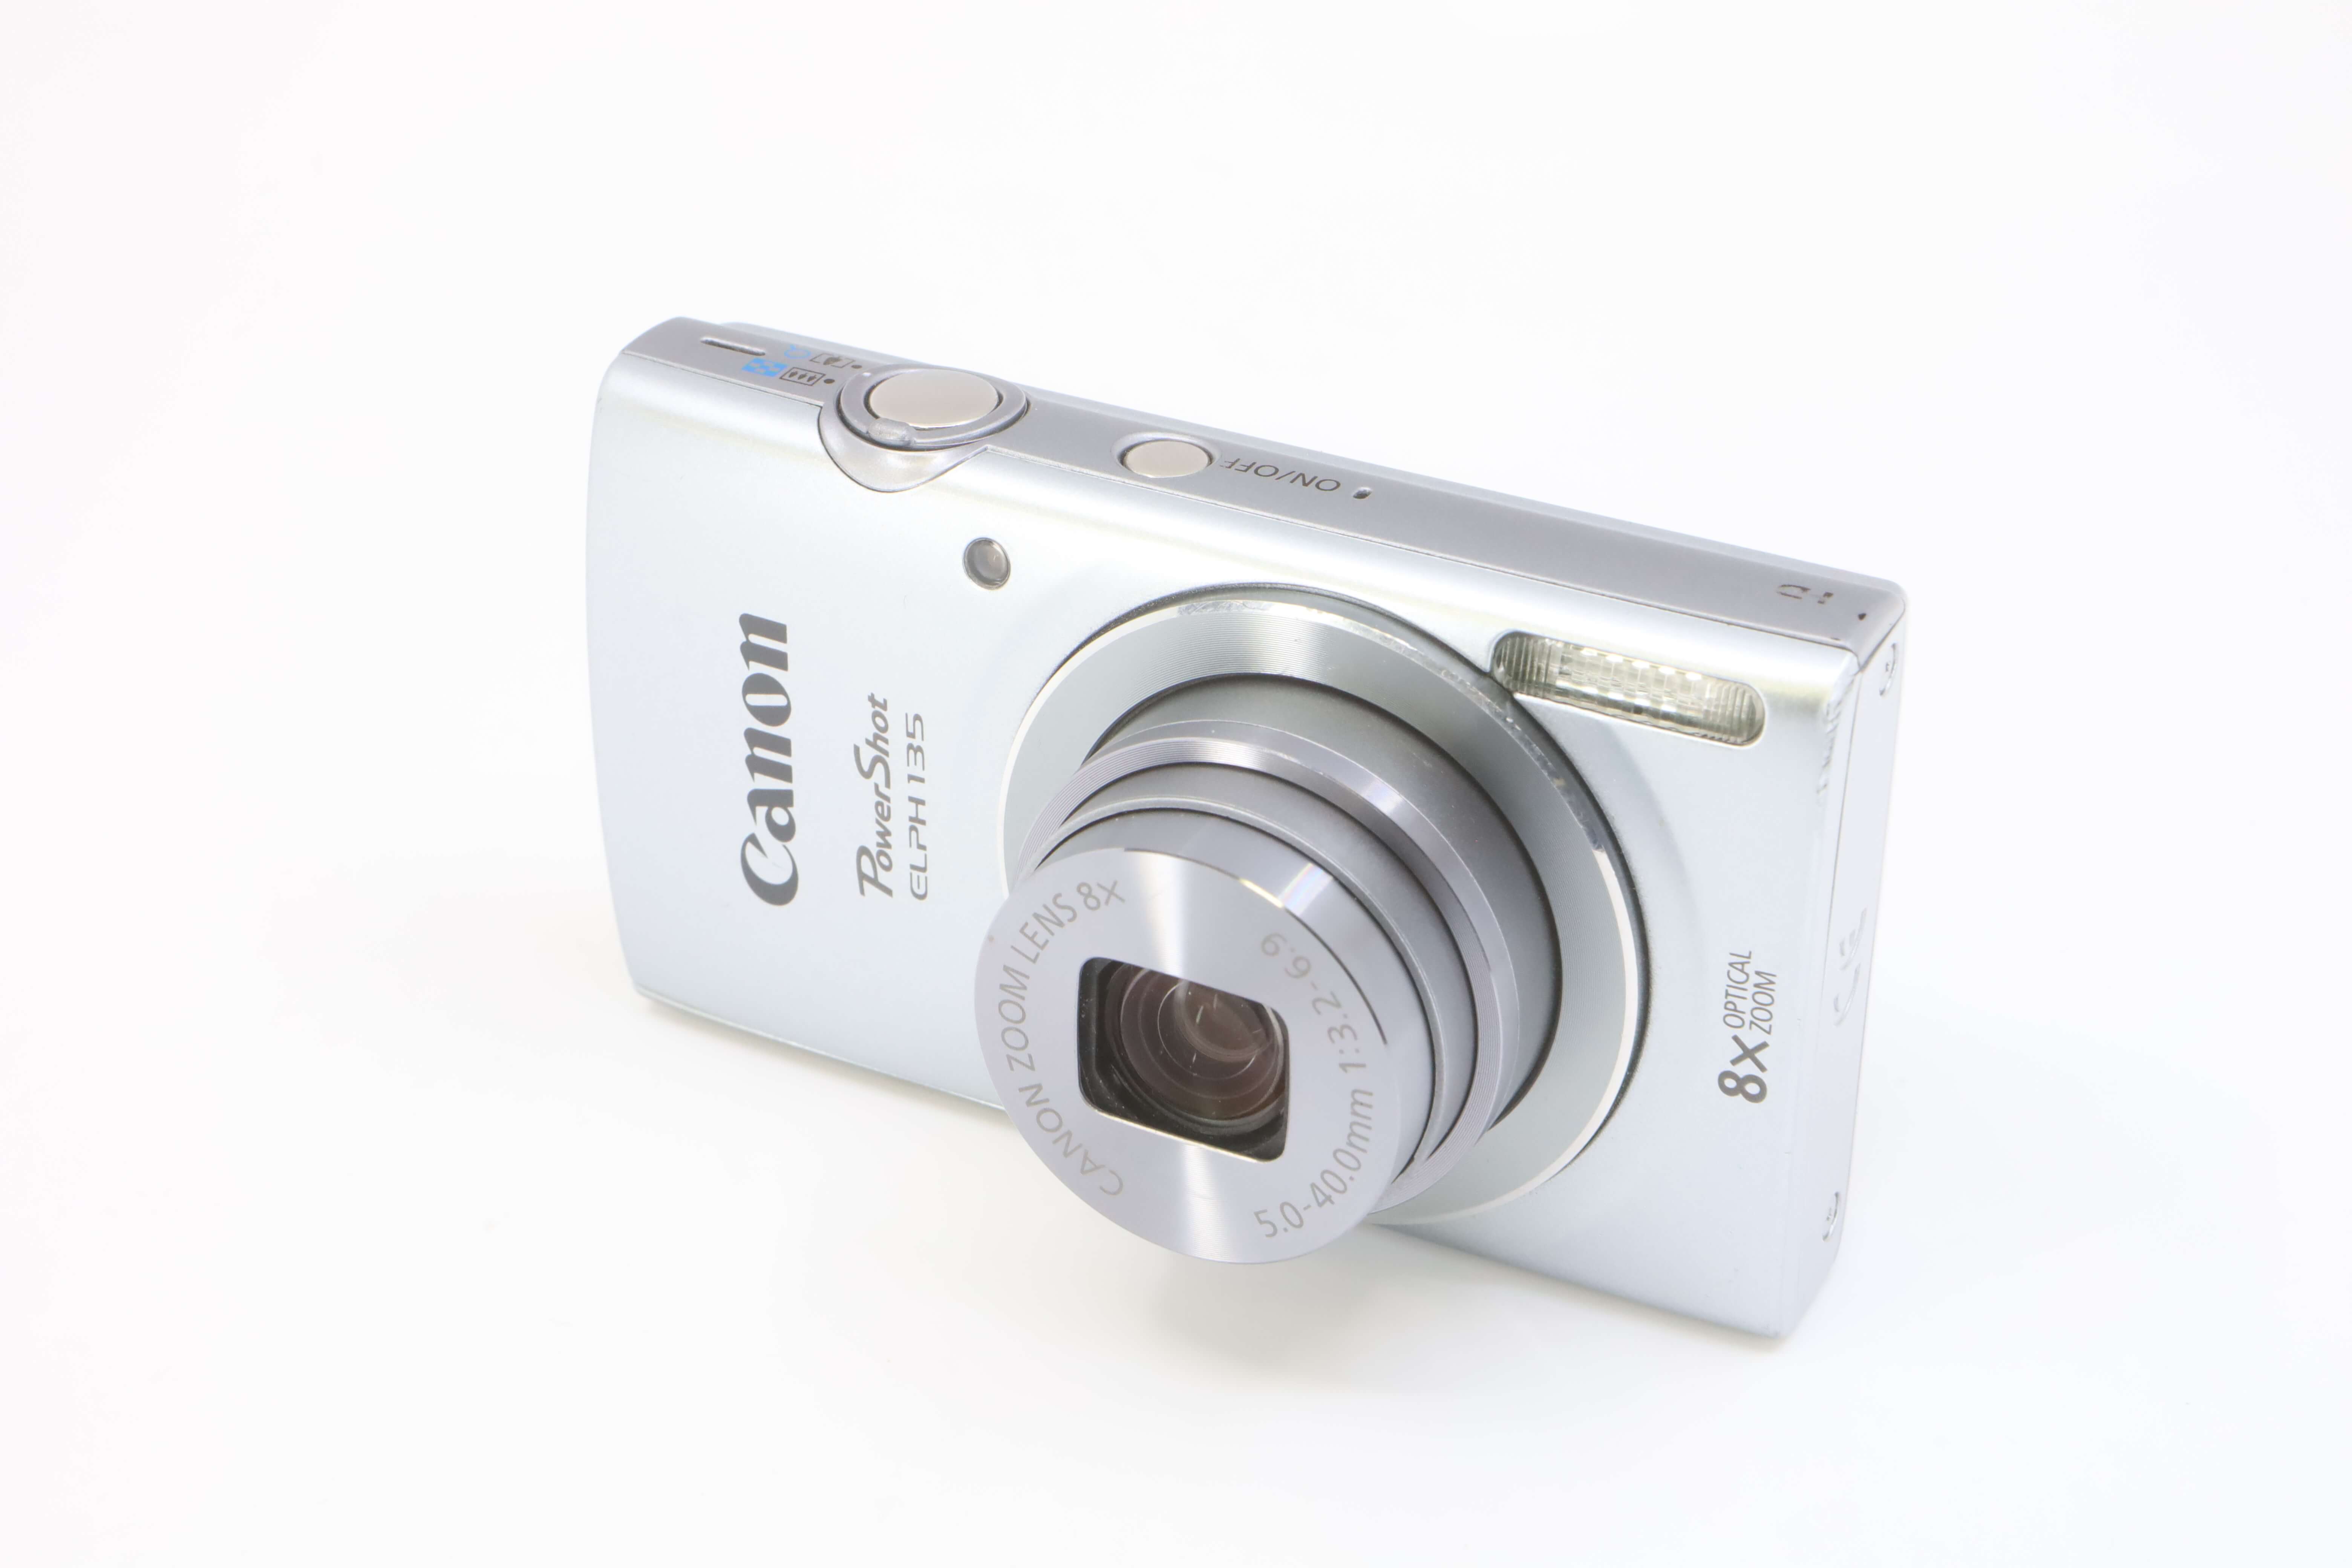 Canon PowerShot ELPH135 Digital Camera (Silver) (Discontinued by